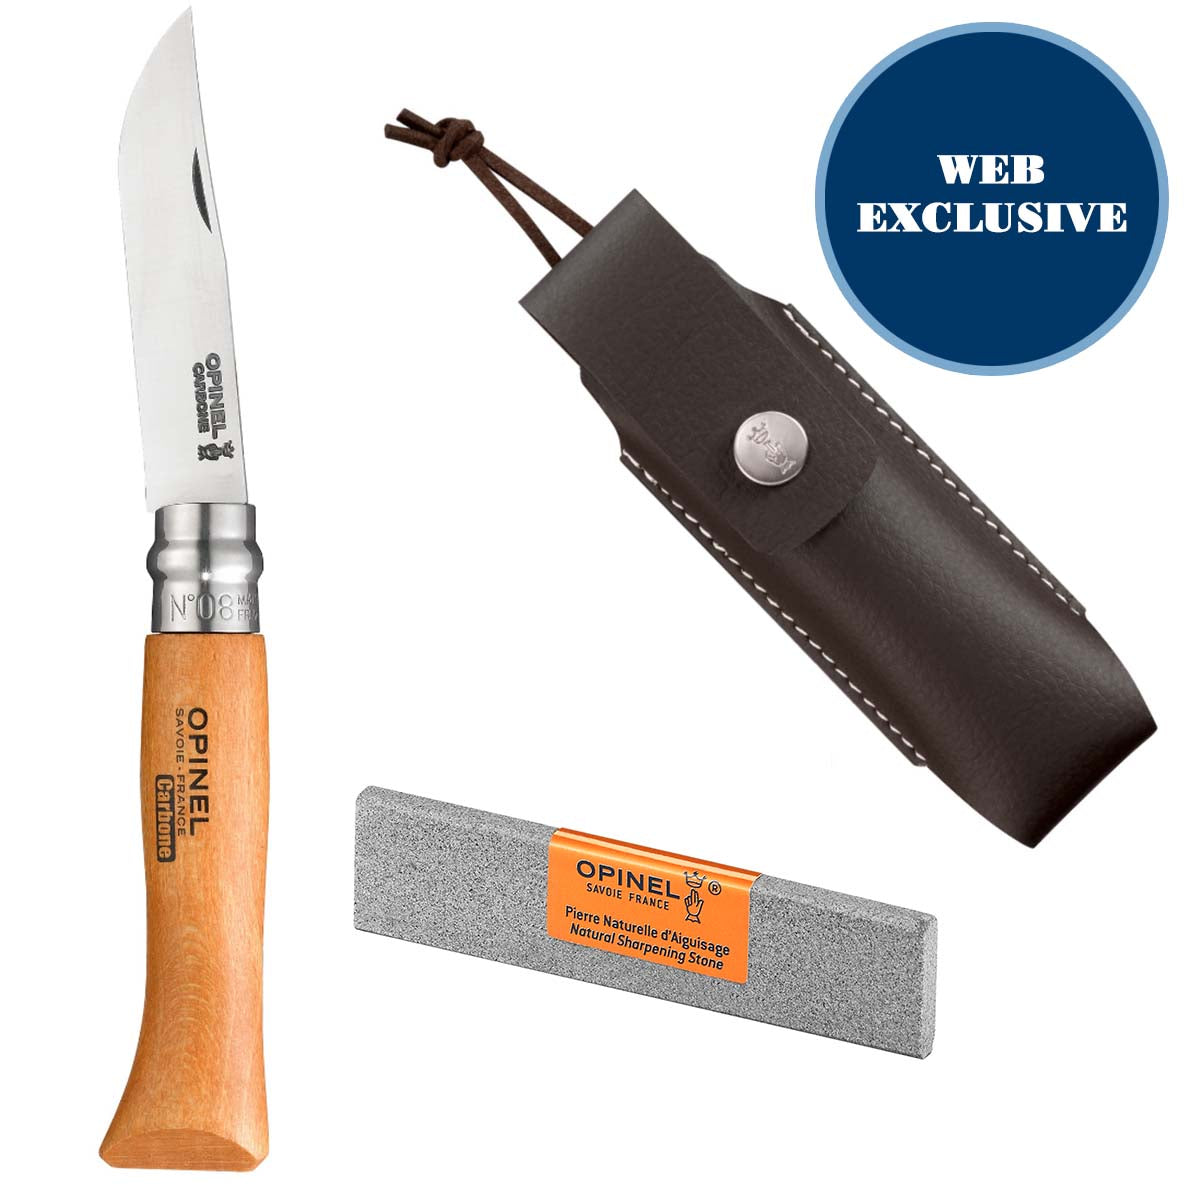 No.08 Every Day Carry Kit - Carbon Steel